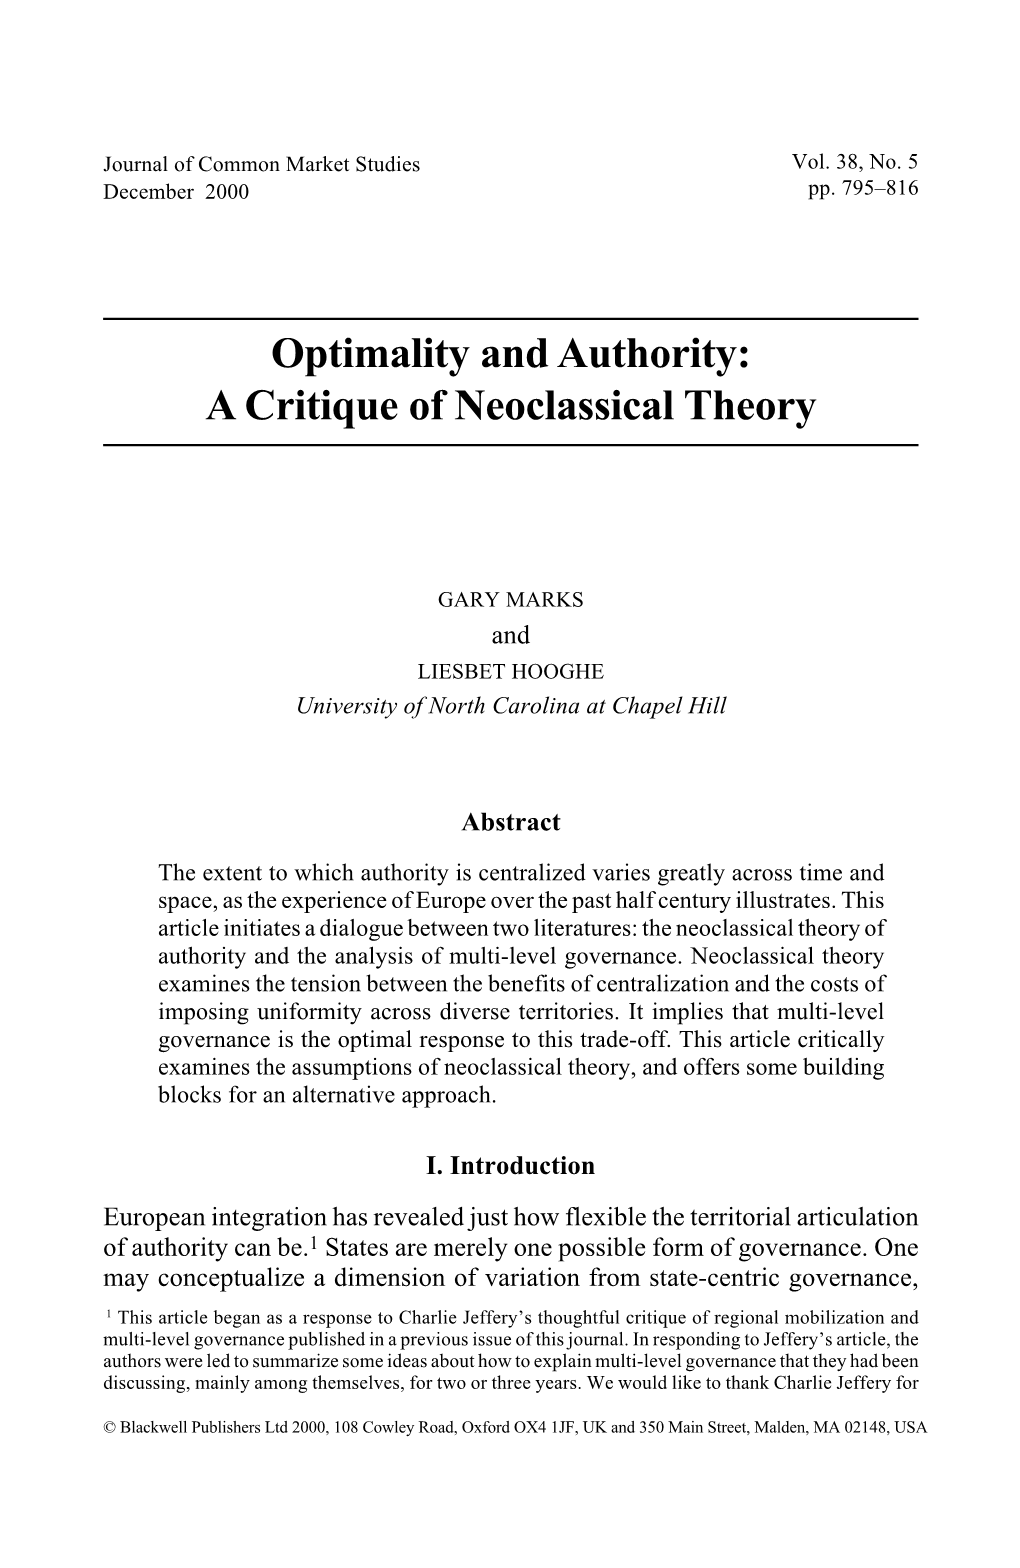 Optimality and Authority: a Critique of Neoclassical Theory